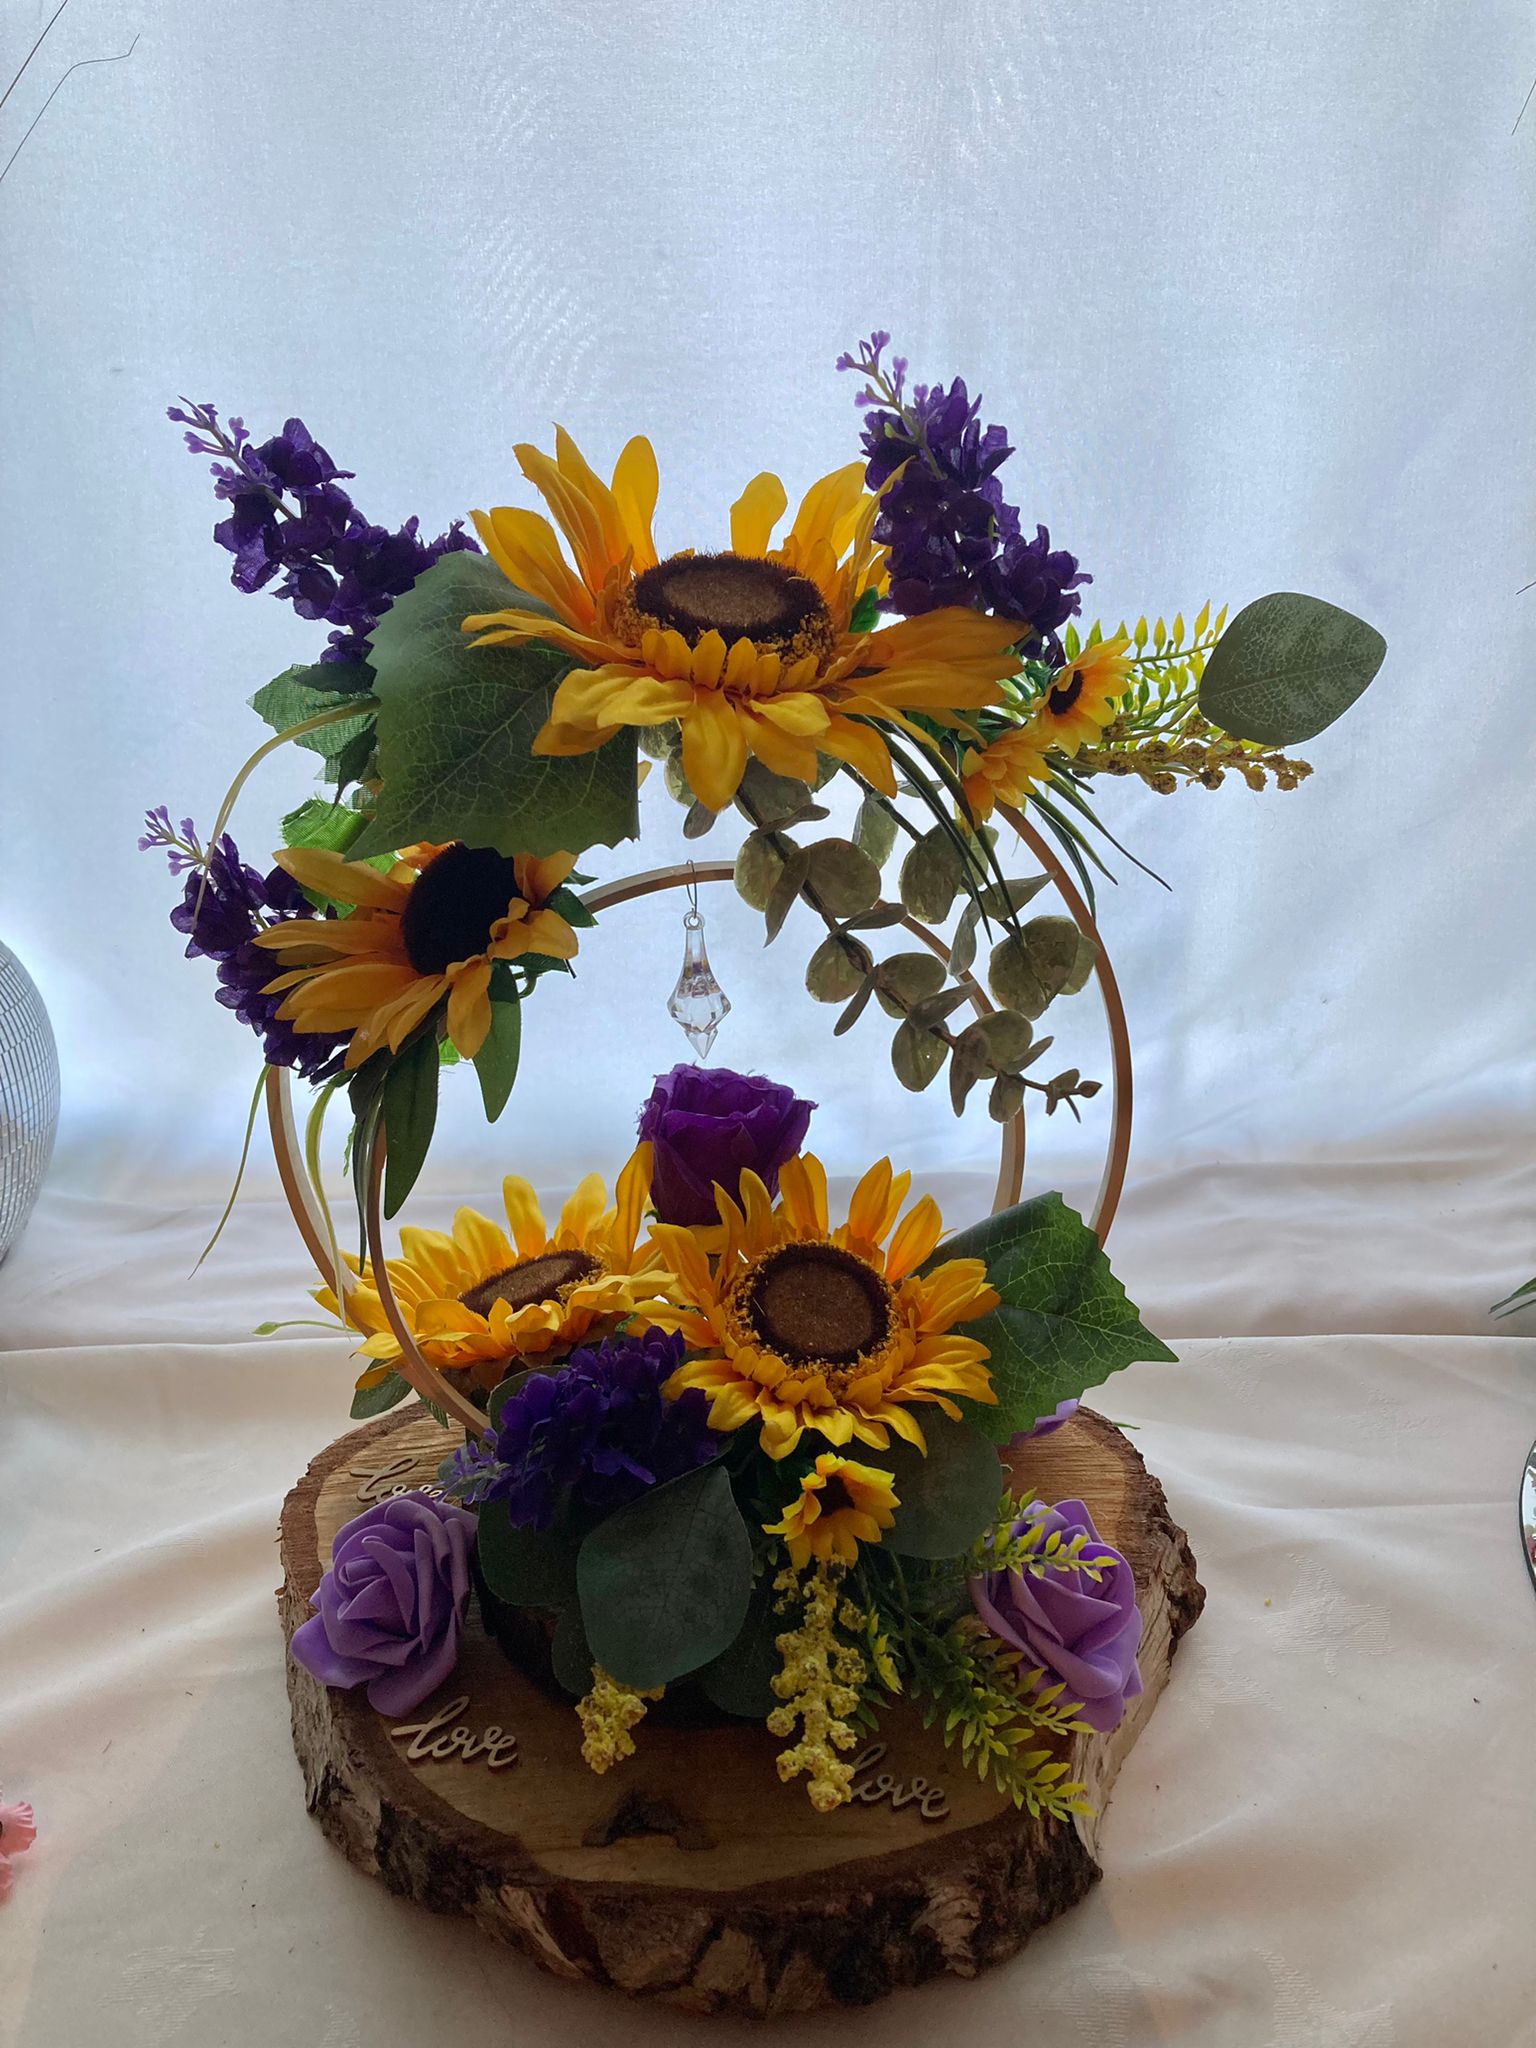 Wooden hoop centrepieces with sunflowers